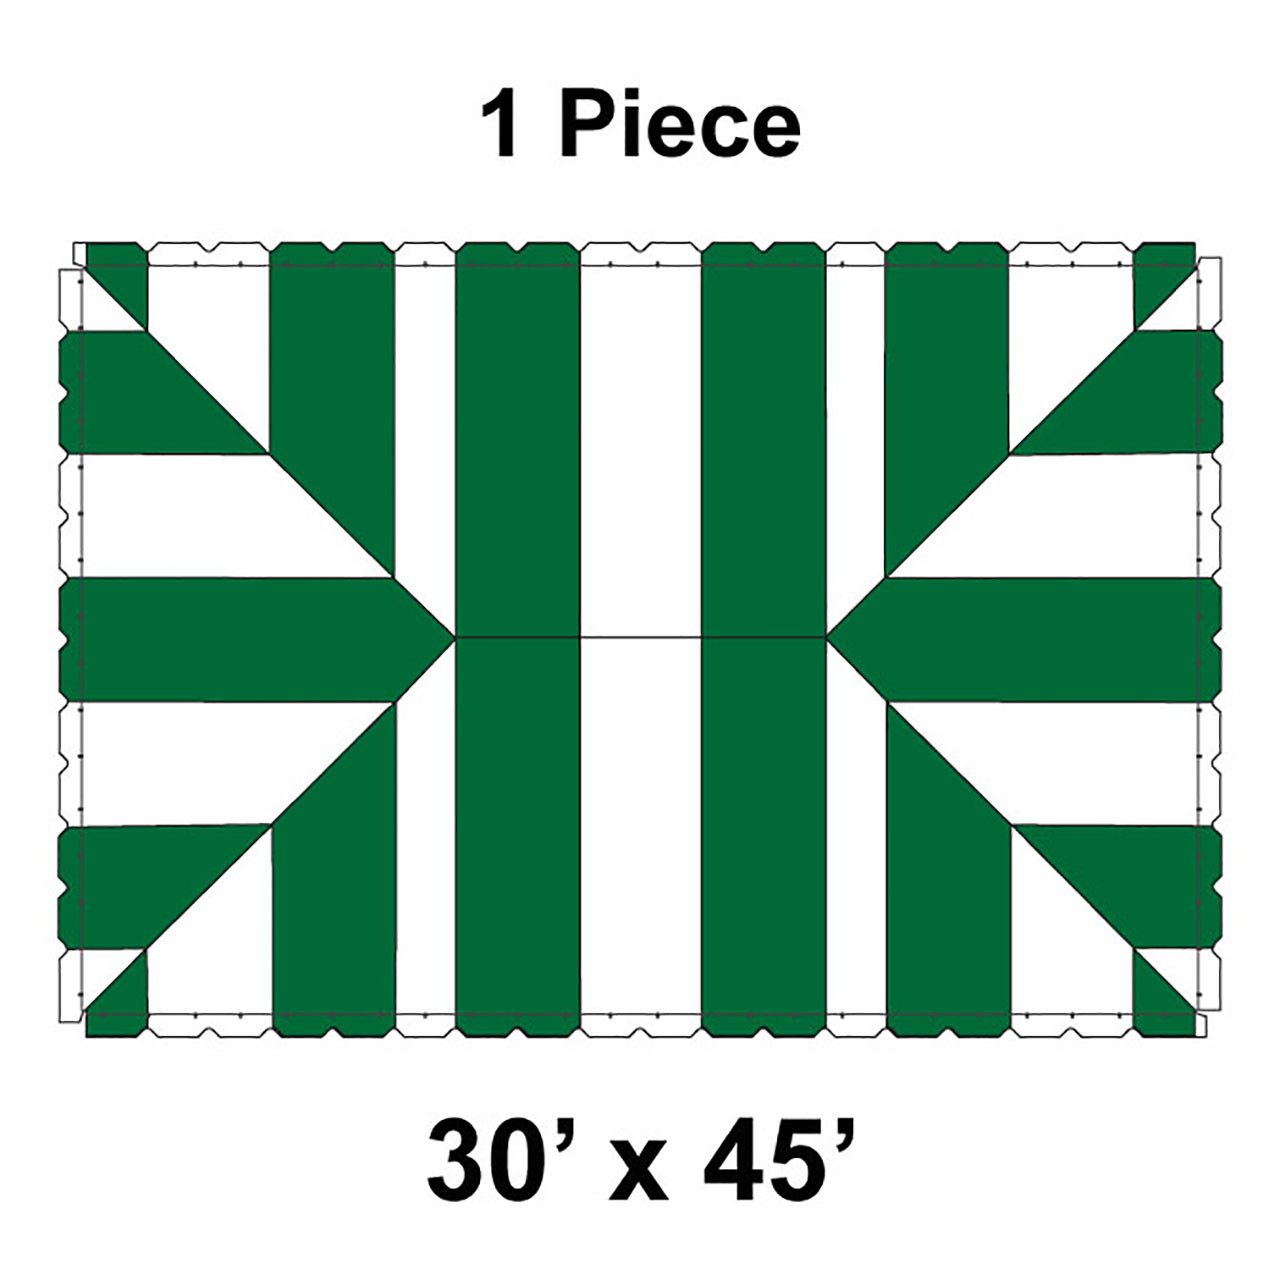 30' x 45' Classic Series Frame Tent, 1 Piece, 16 oz. Ratchet Top, White and Forest Green